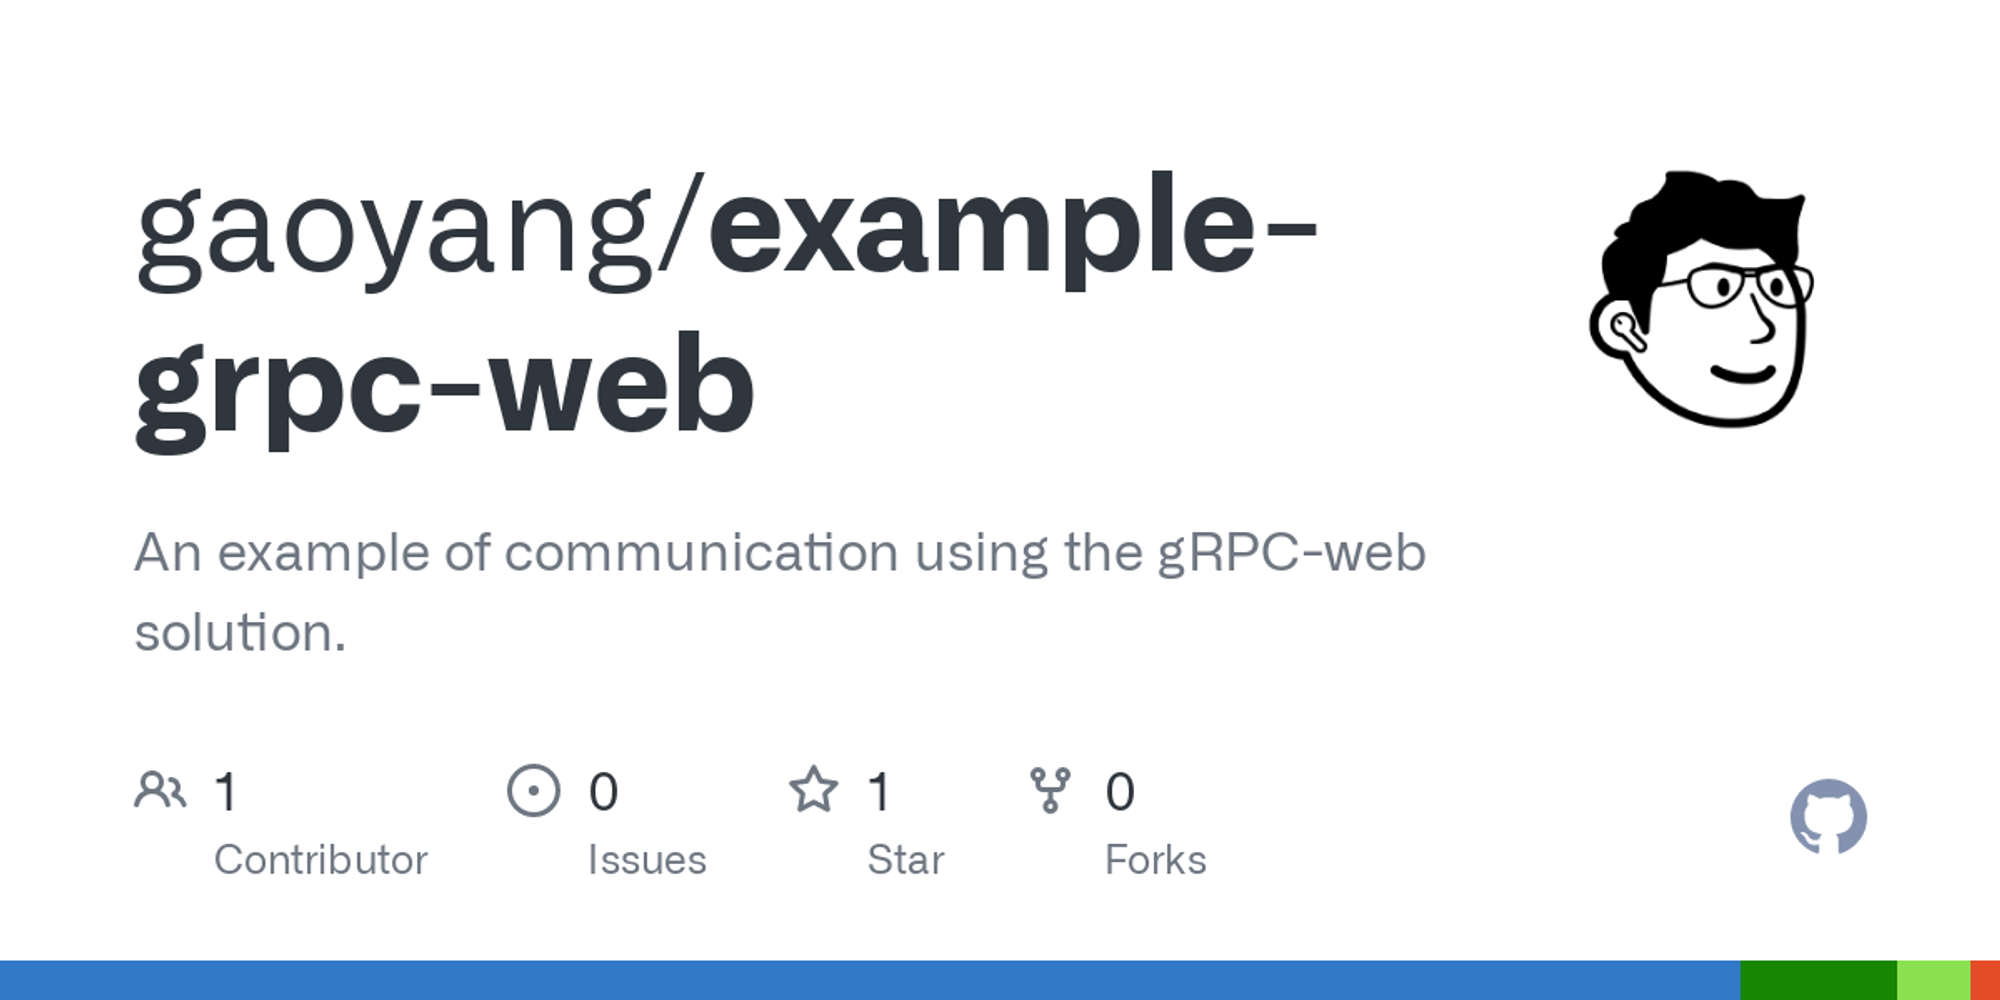 GitHub - gaoyang/example-grpc-web: An example of communication using the gRPC-web solution.